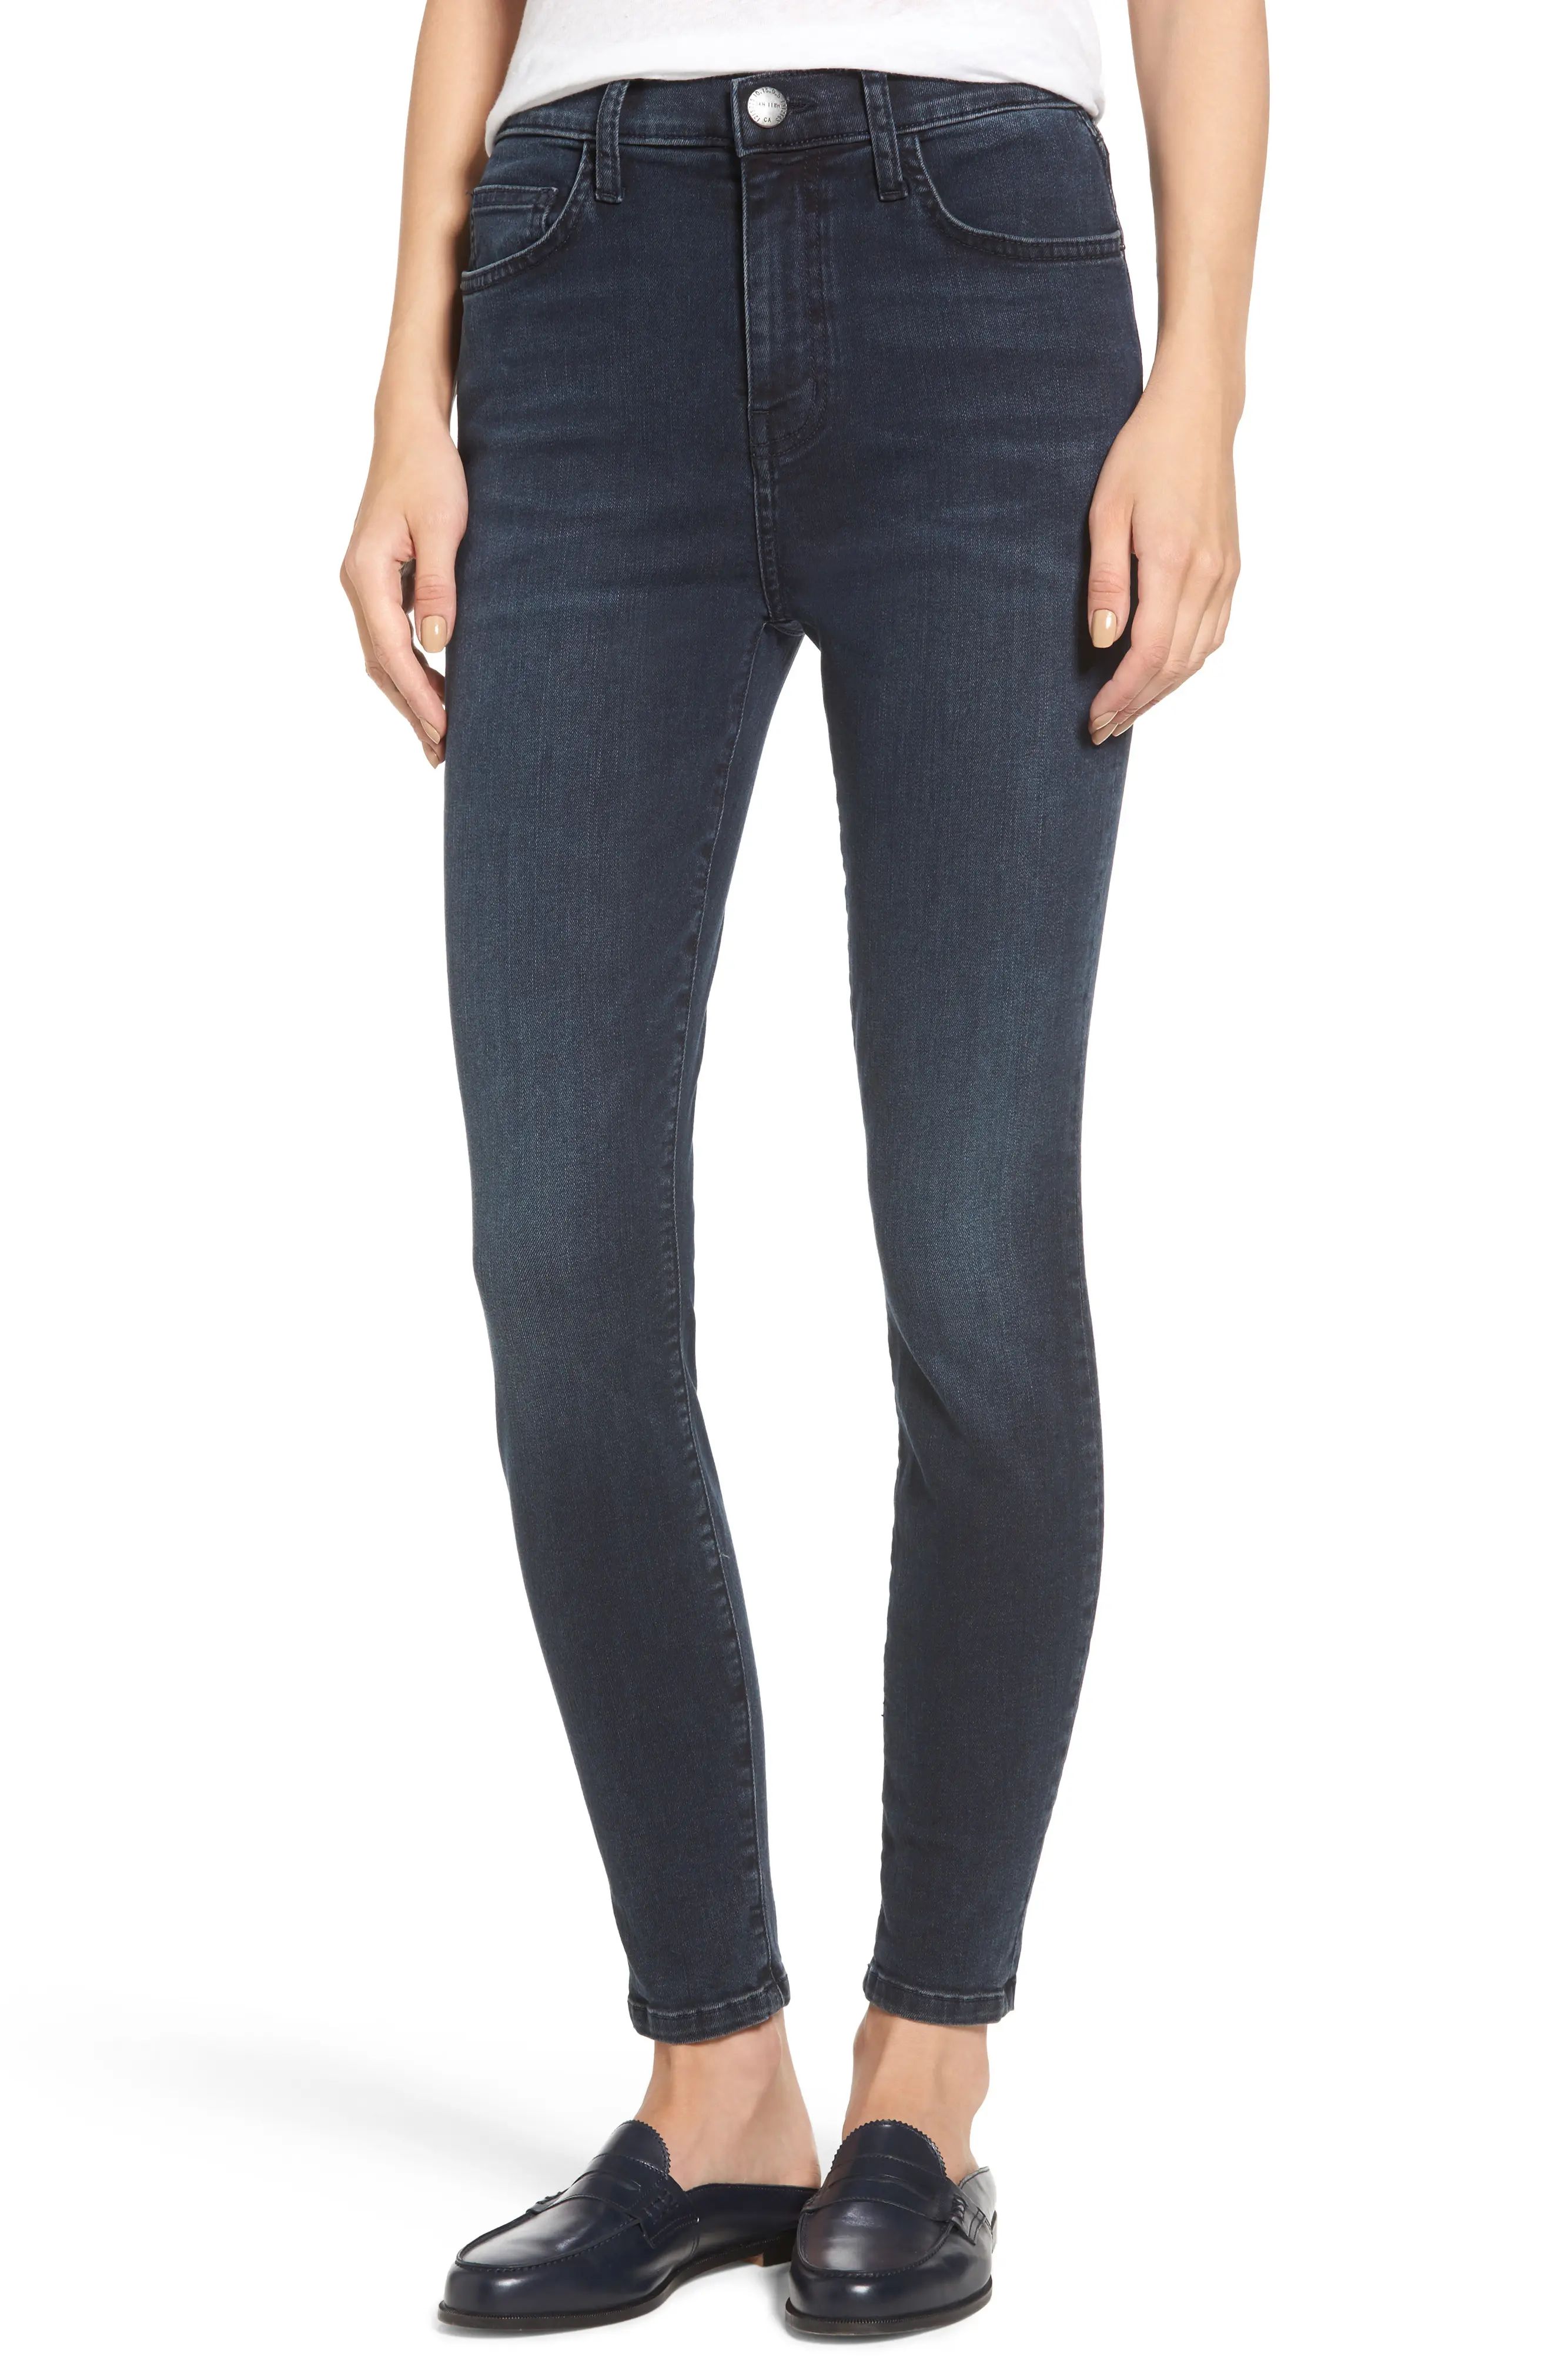 The Super High Waist Stiletto Ankle Skinny Jeans | Nordstrom